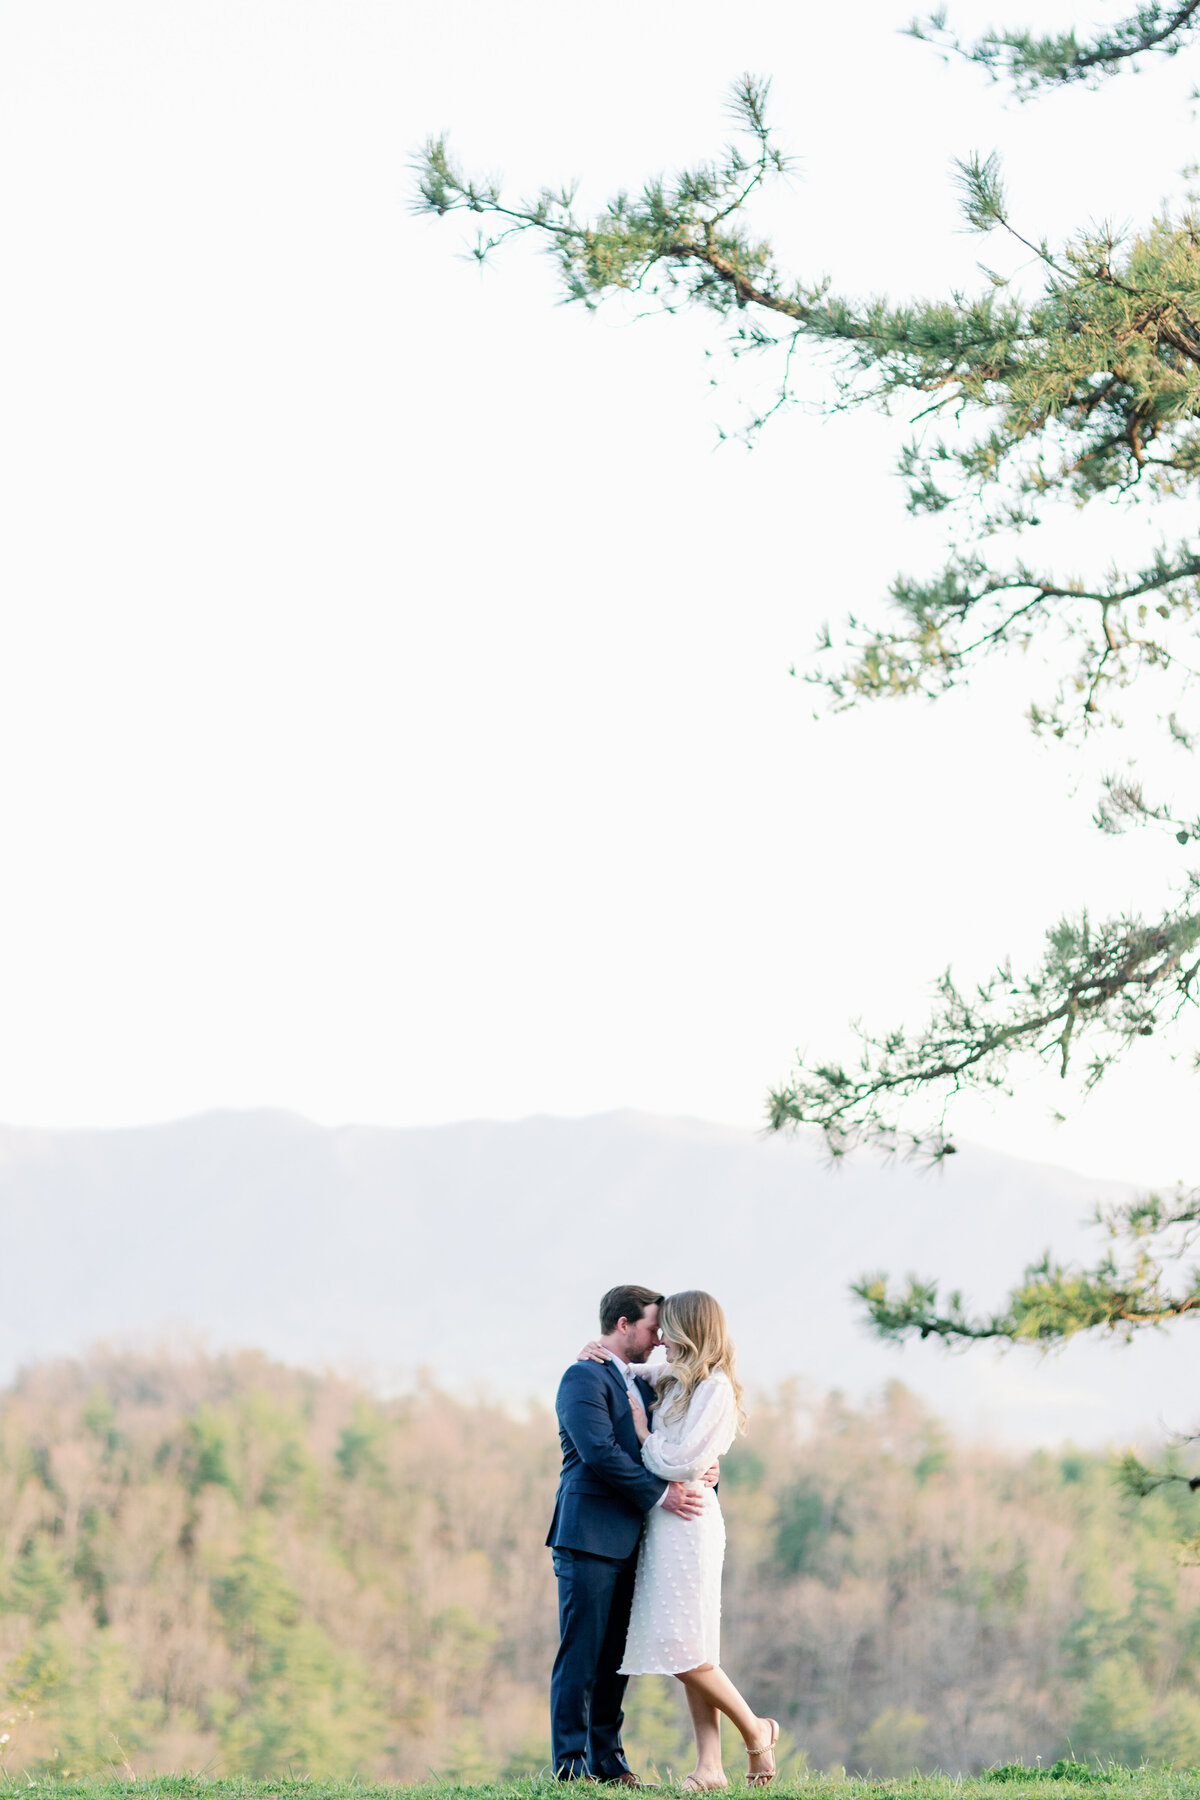 Alyssa and Craig Moutain Engagement - FootHills Parkway - East Tennessee Wedding Photographer - Alaina René Photogrphy-121